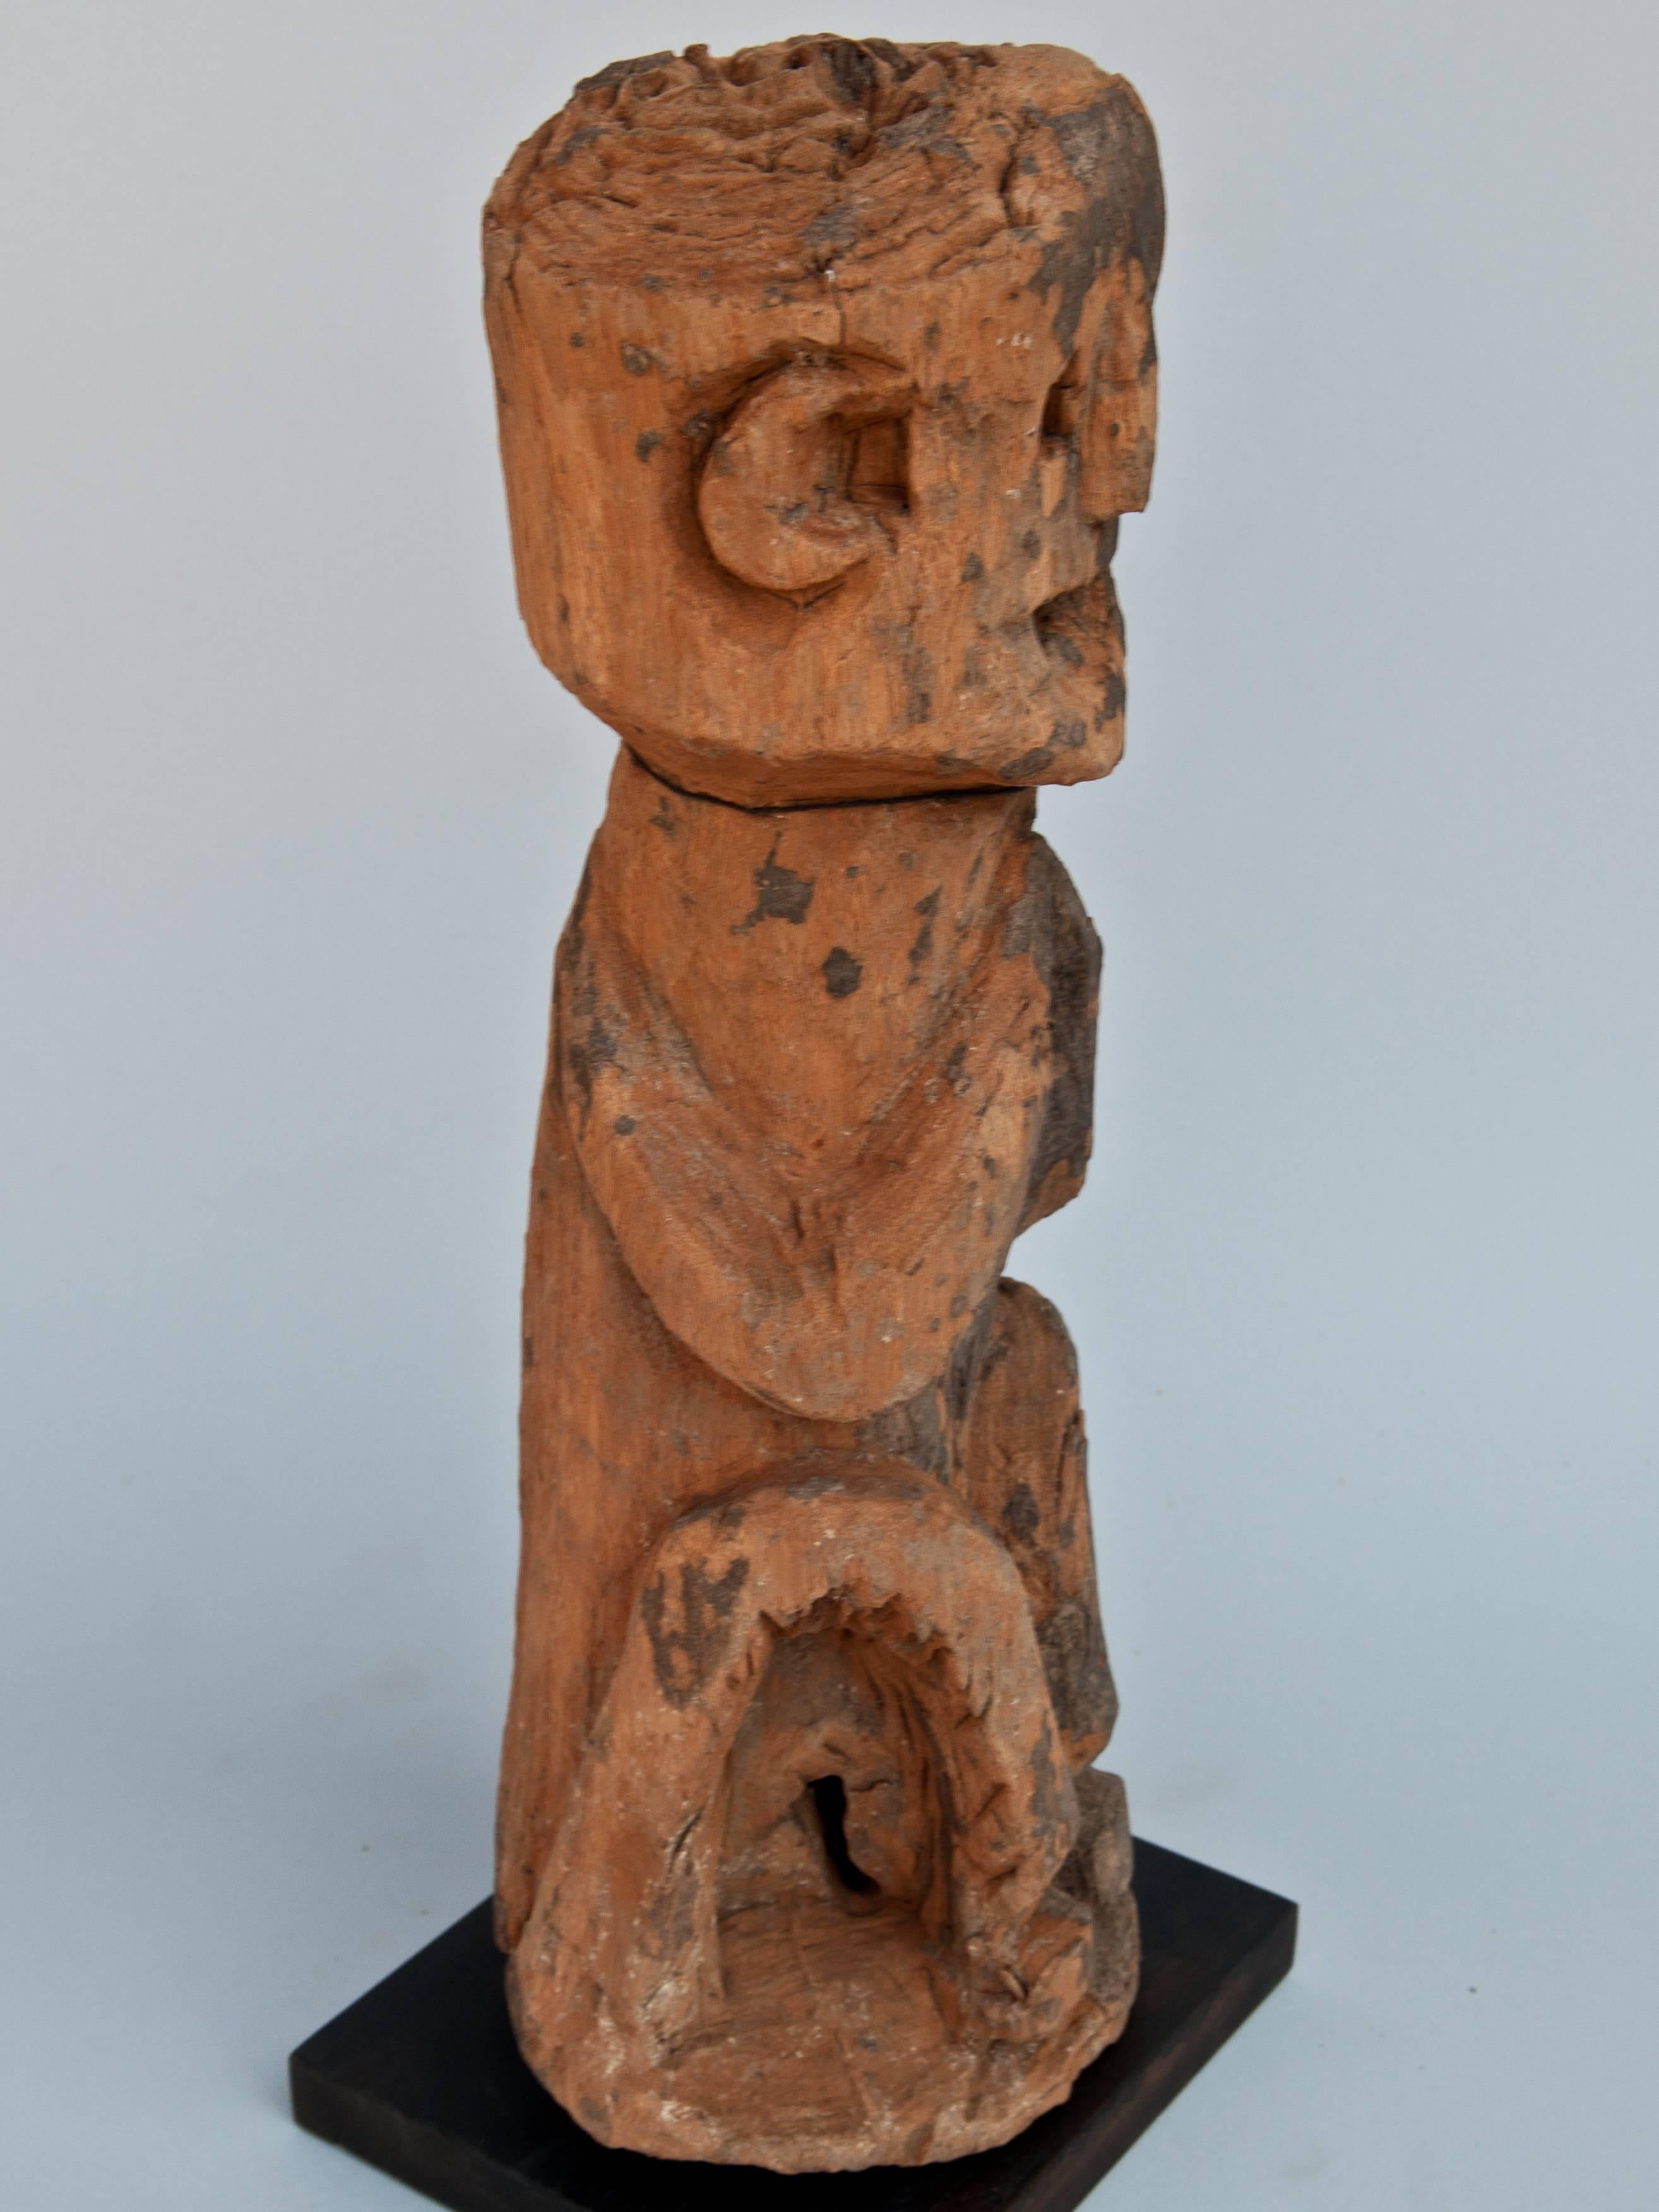 Hand-Carved Wooden Ancestral Figure from West Nepal, Early to Mid 20th Century, Wooden Stand